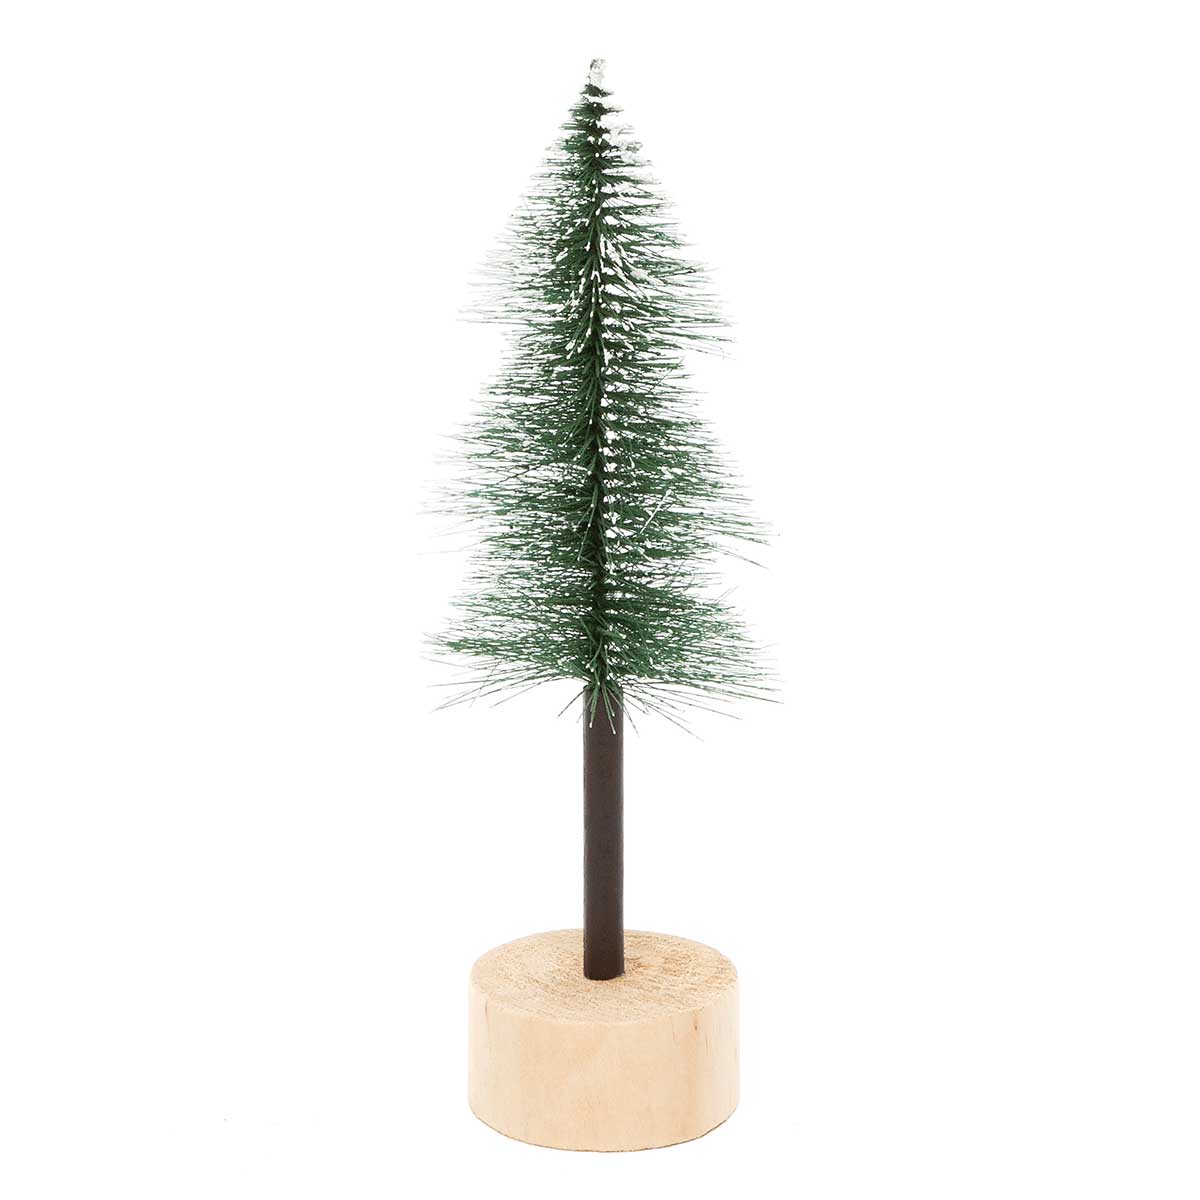 !ALPINE BRISTLE TREE DARK GREEN WITH WOOD TRUNK AND BASE